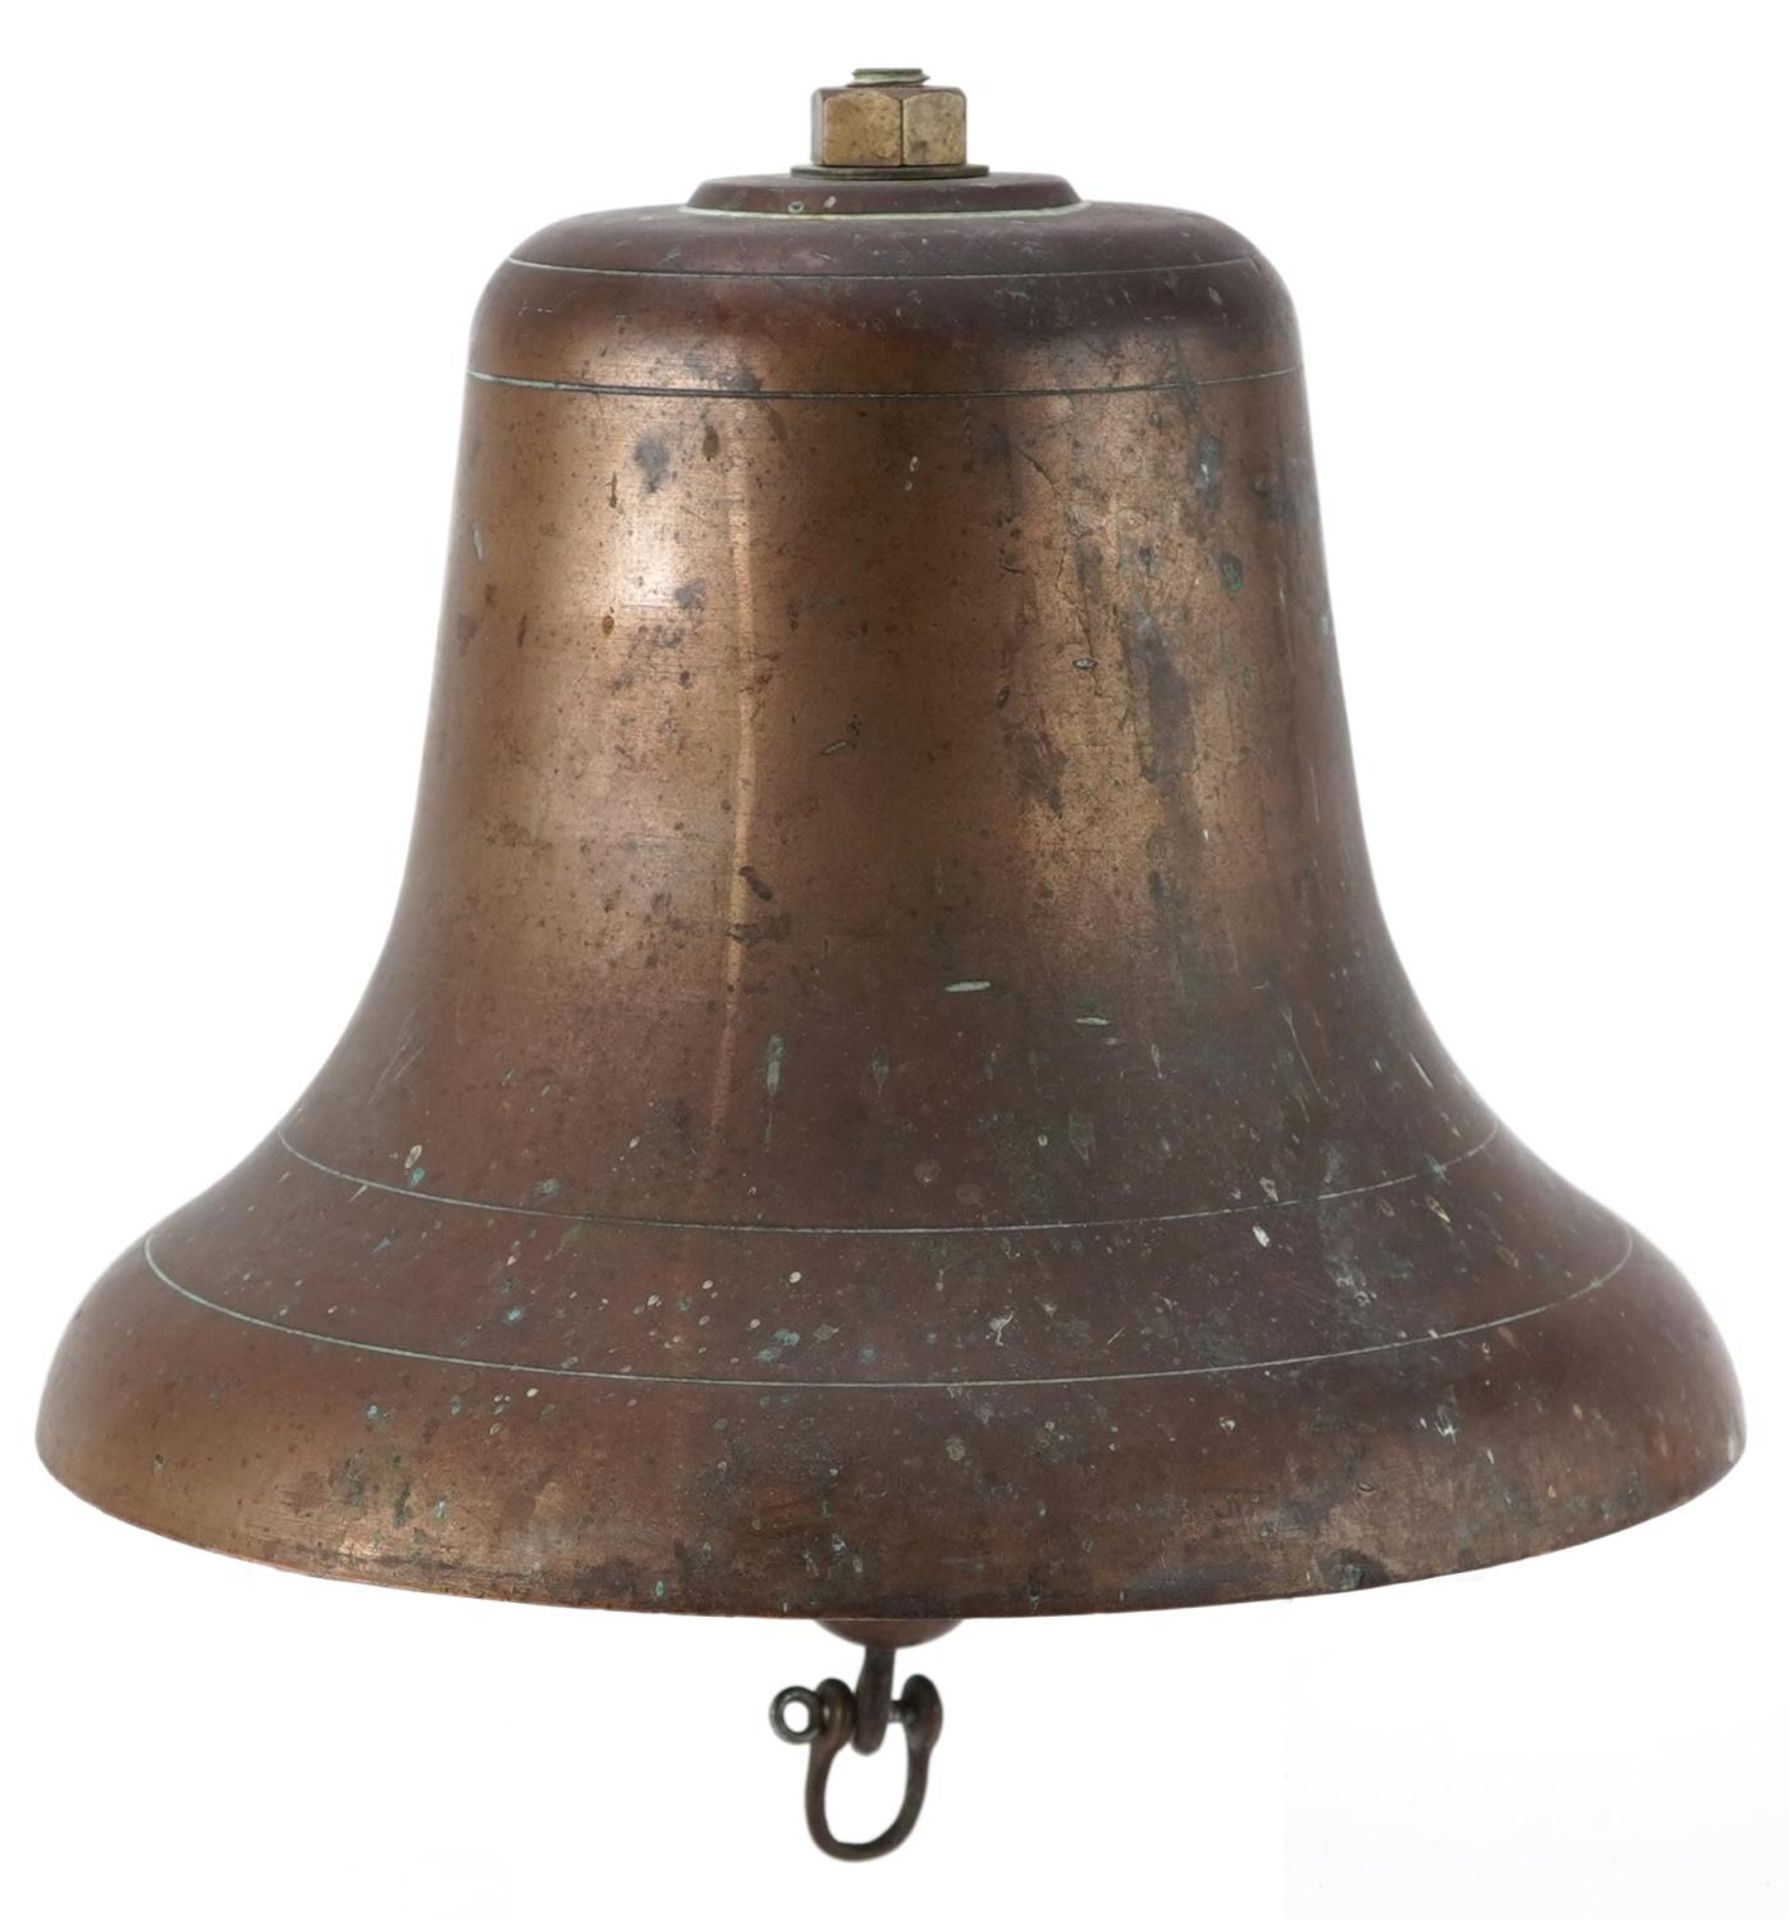 Antique patinated bronze ship's bell, 20.5cm high